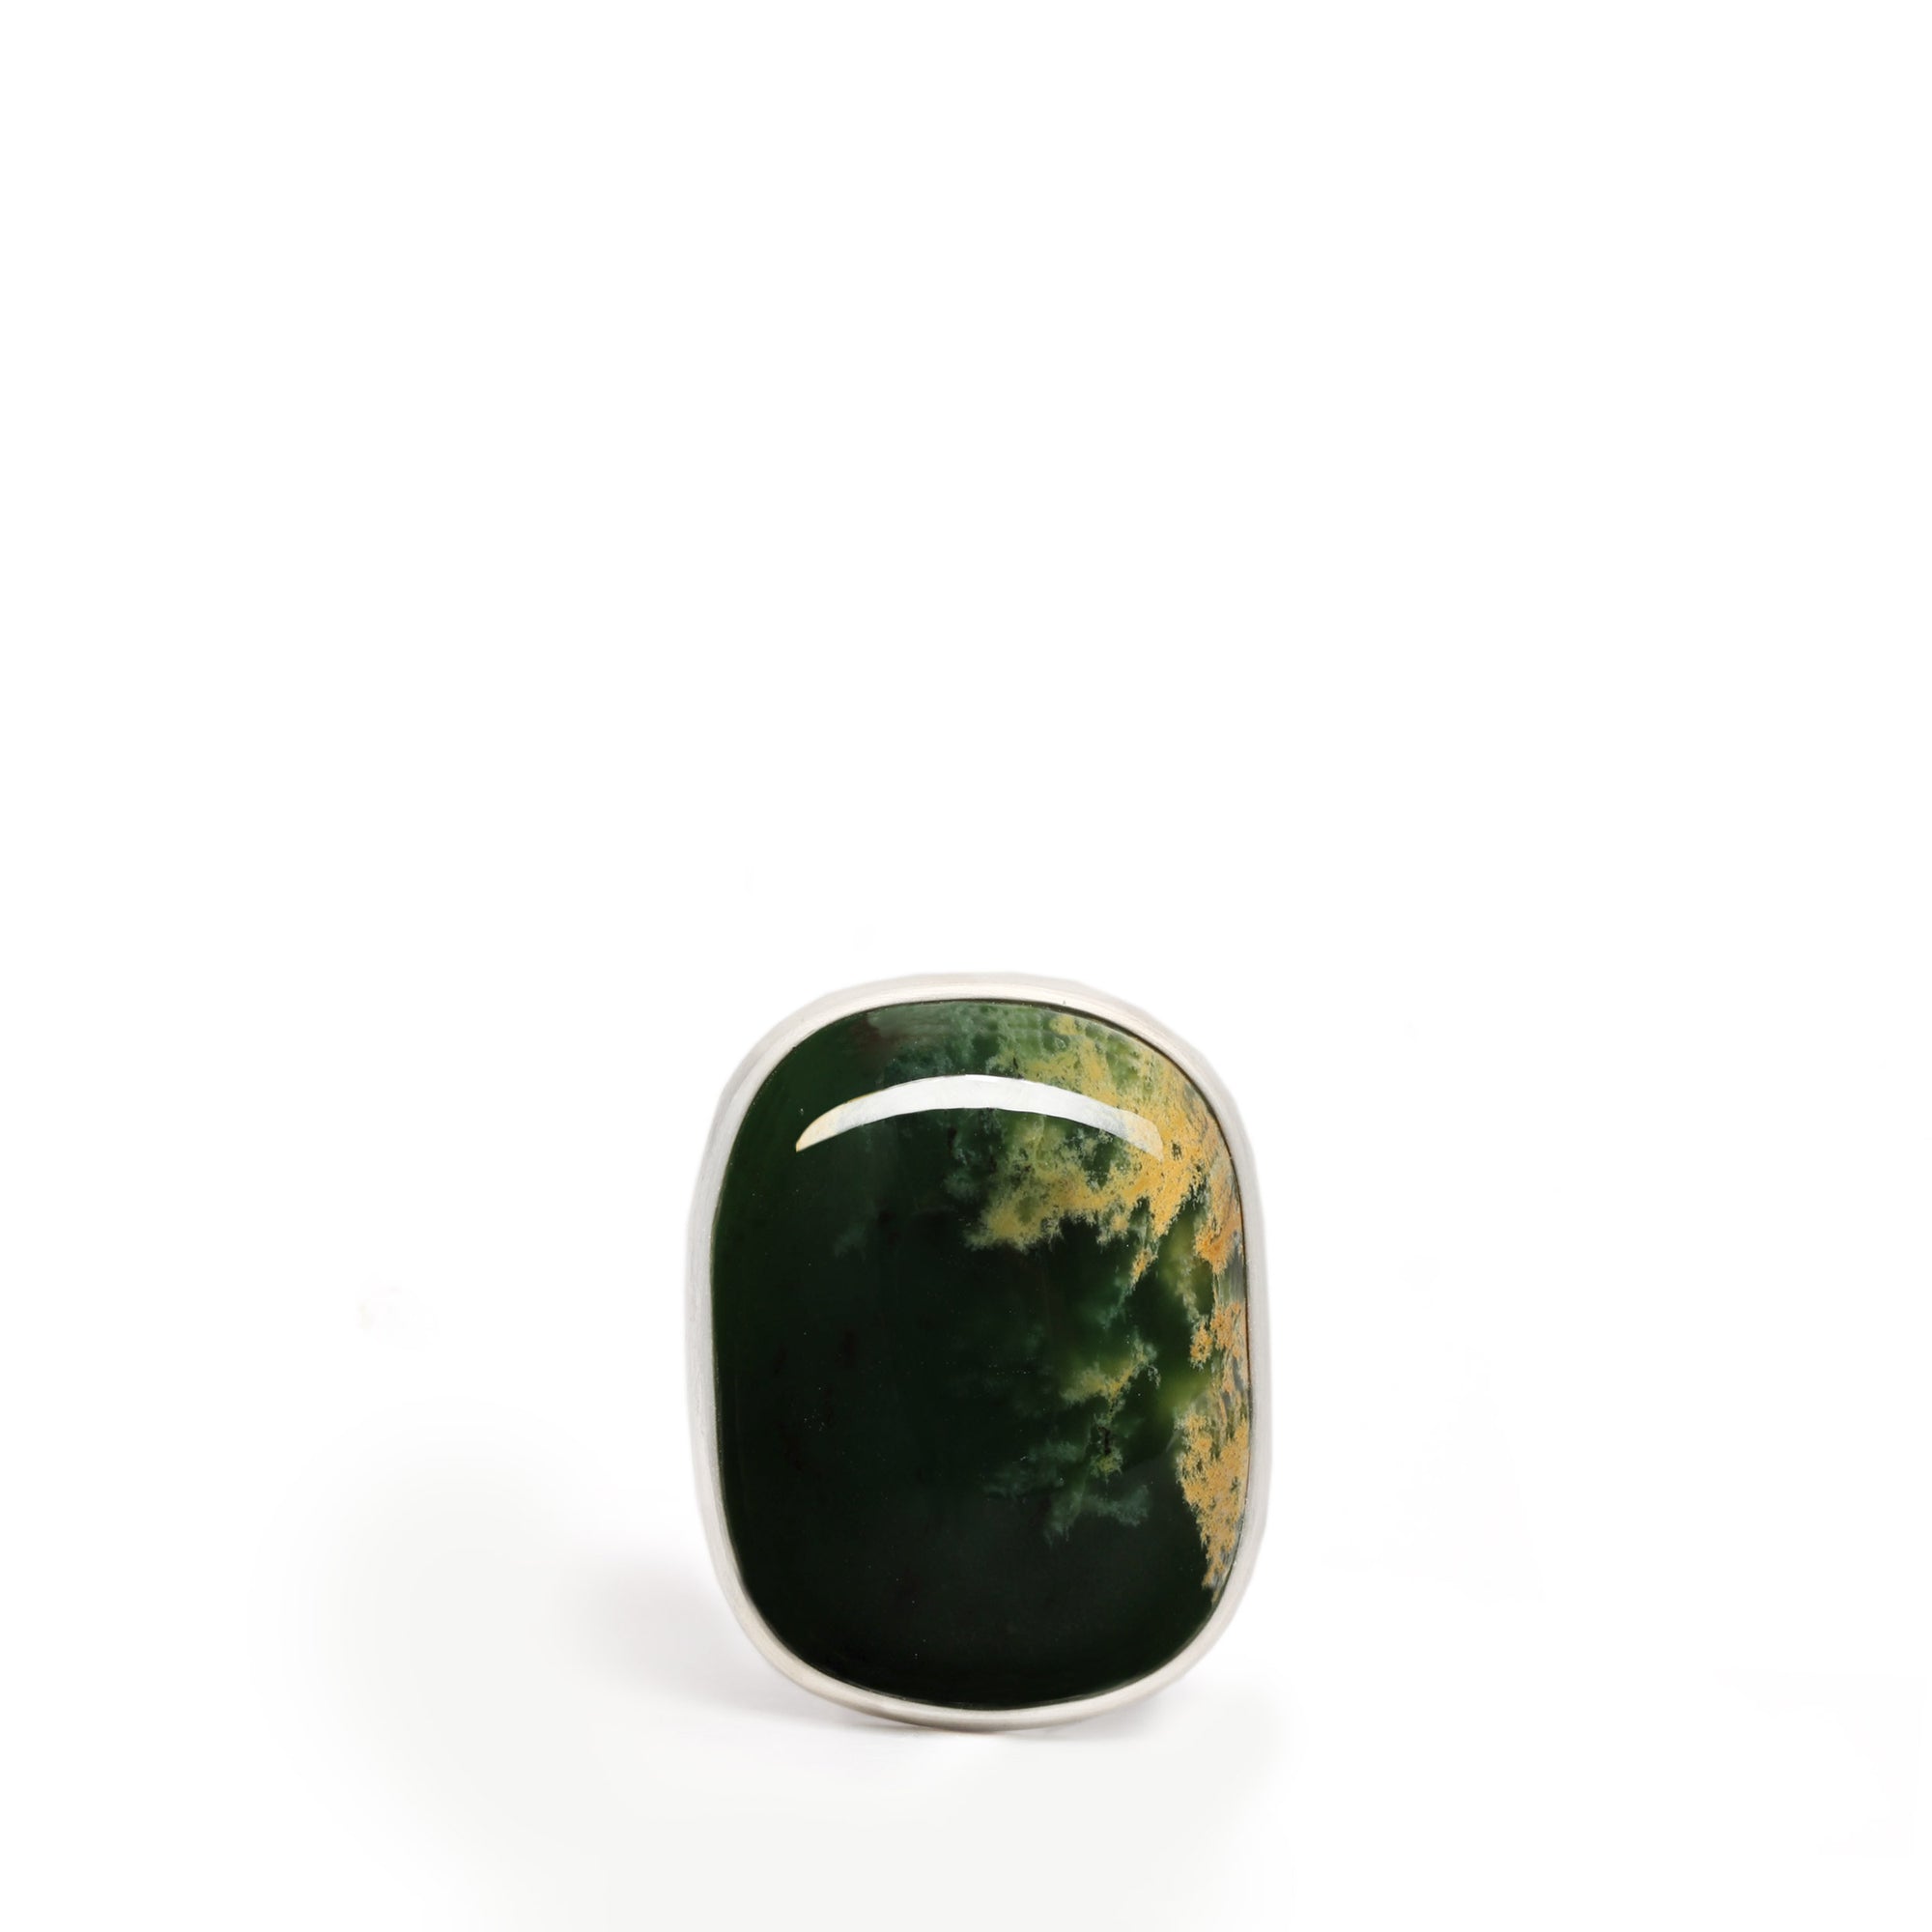 New Zealand Flower Jade and Silver Ring - Size Q